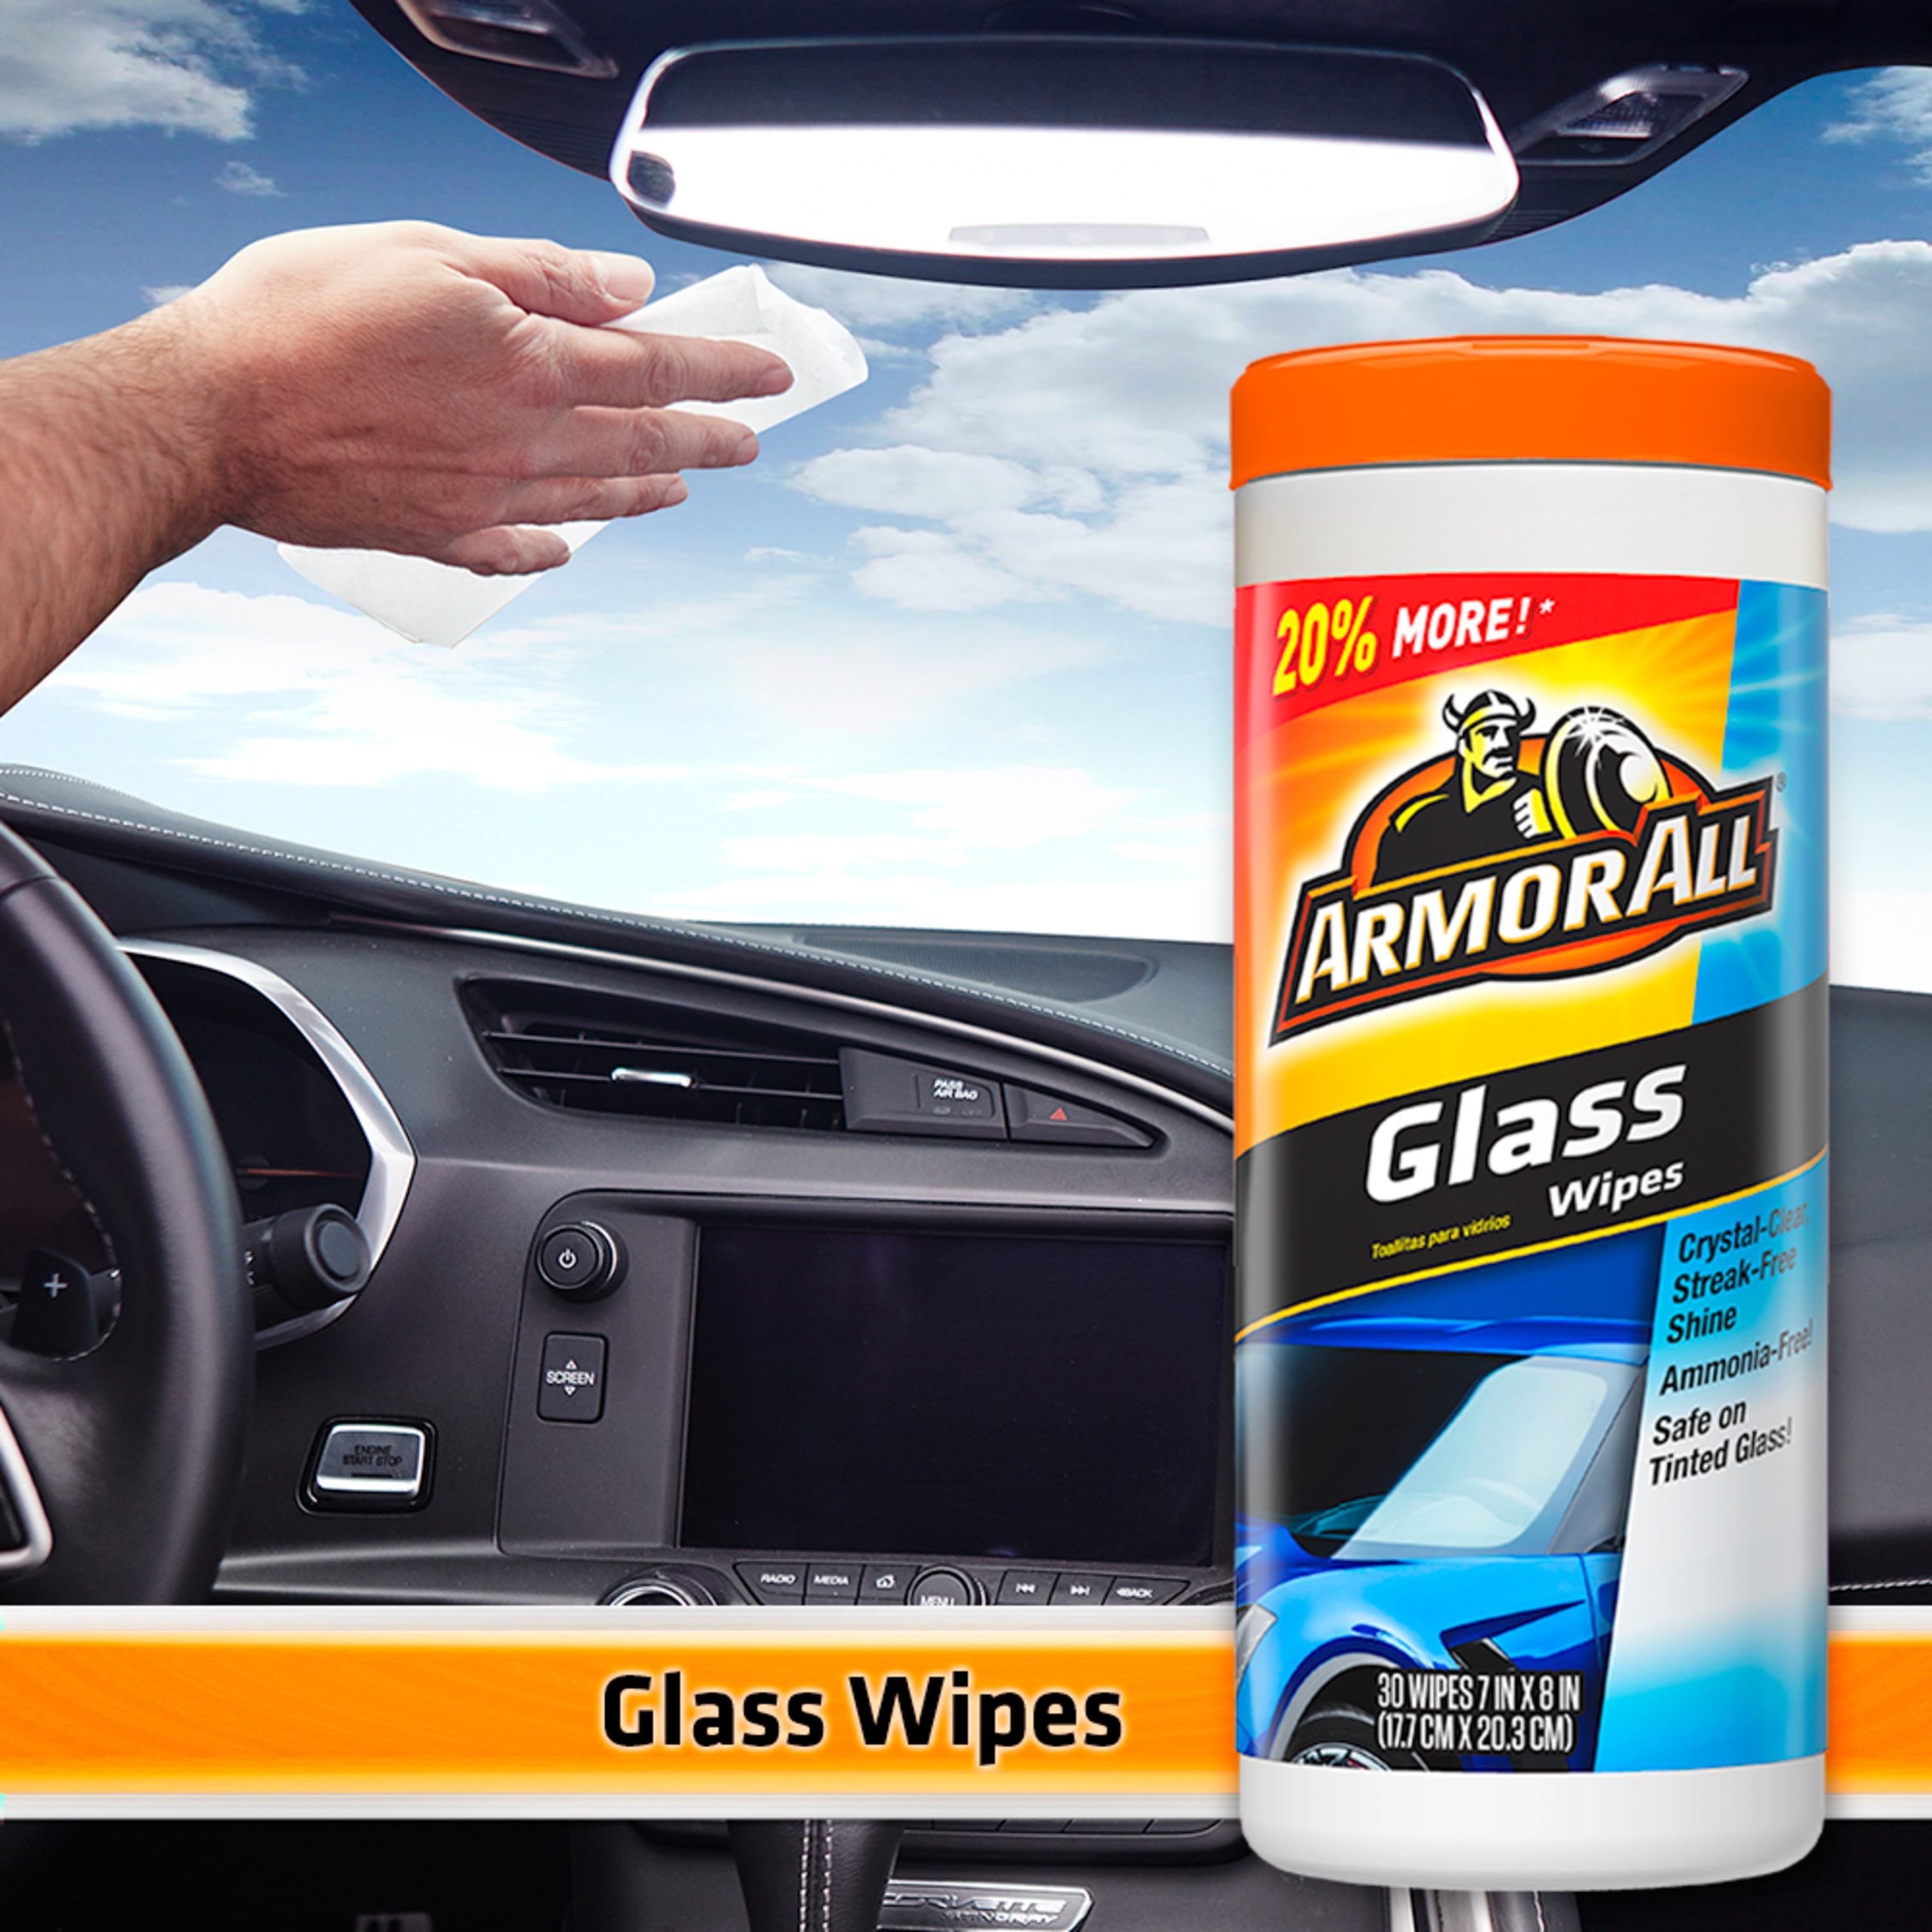 Armor All Cleaning Wipes in a Pouch, 60 Count - Car Interior Cleaner:  Ultimate Car Wipes and Interior Care Products 